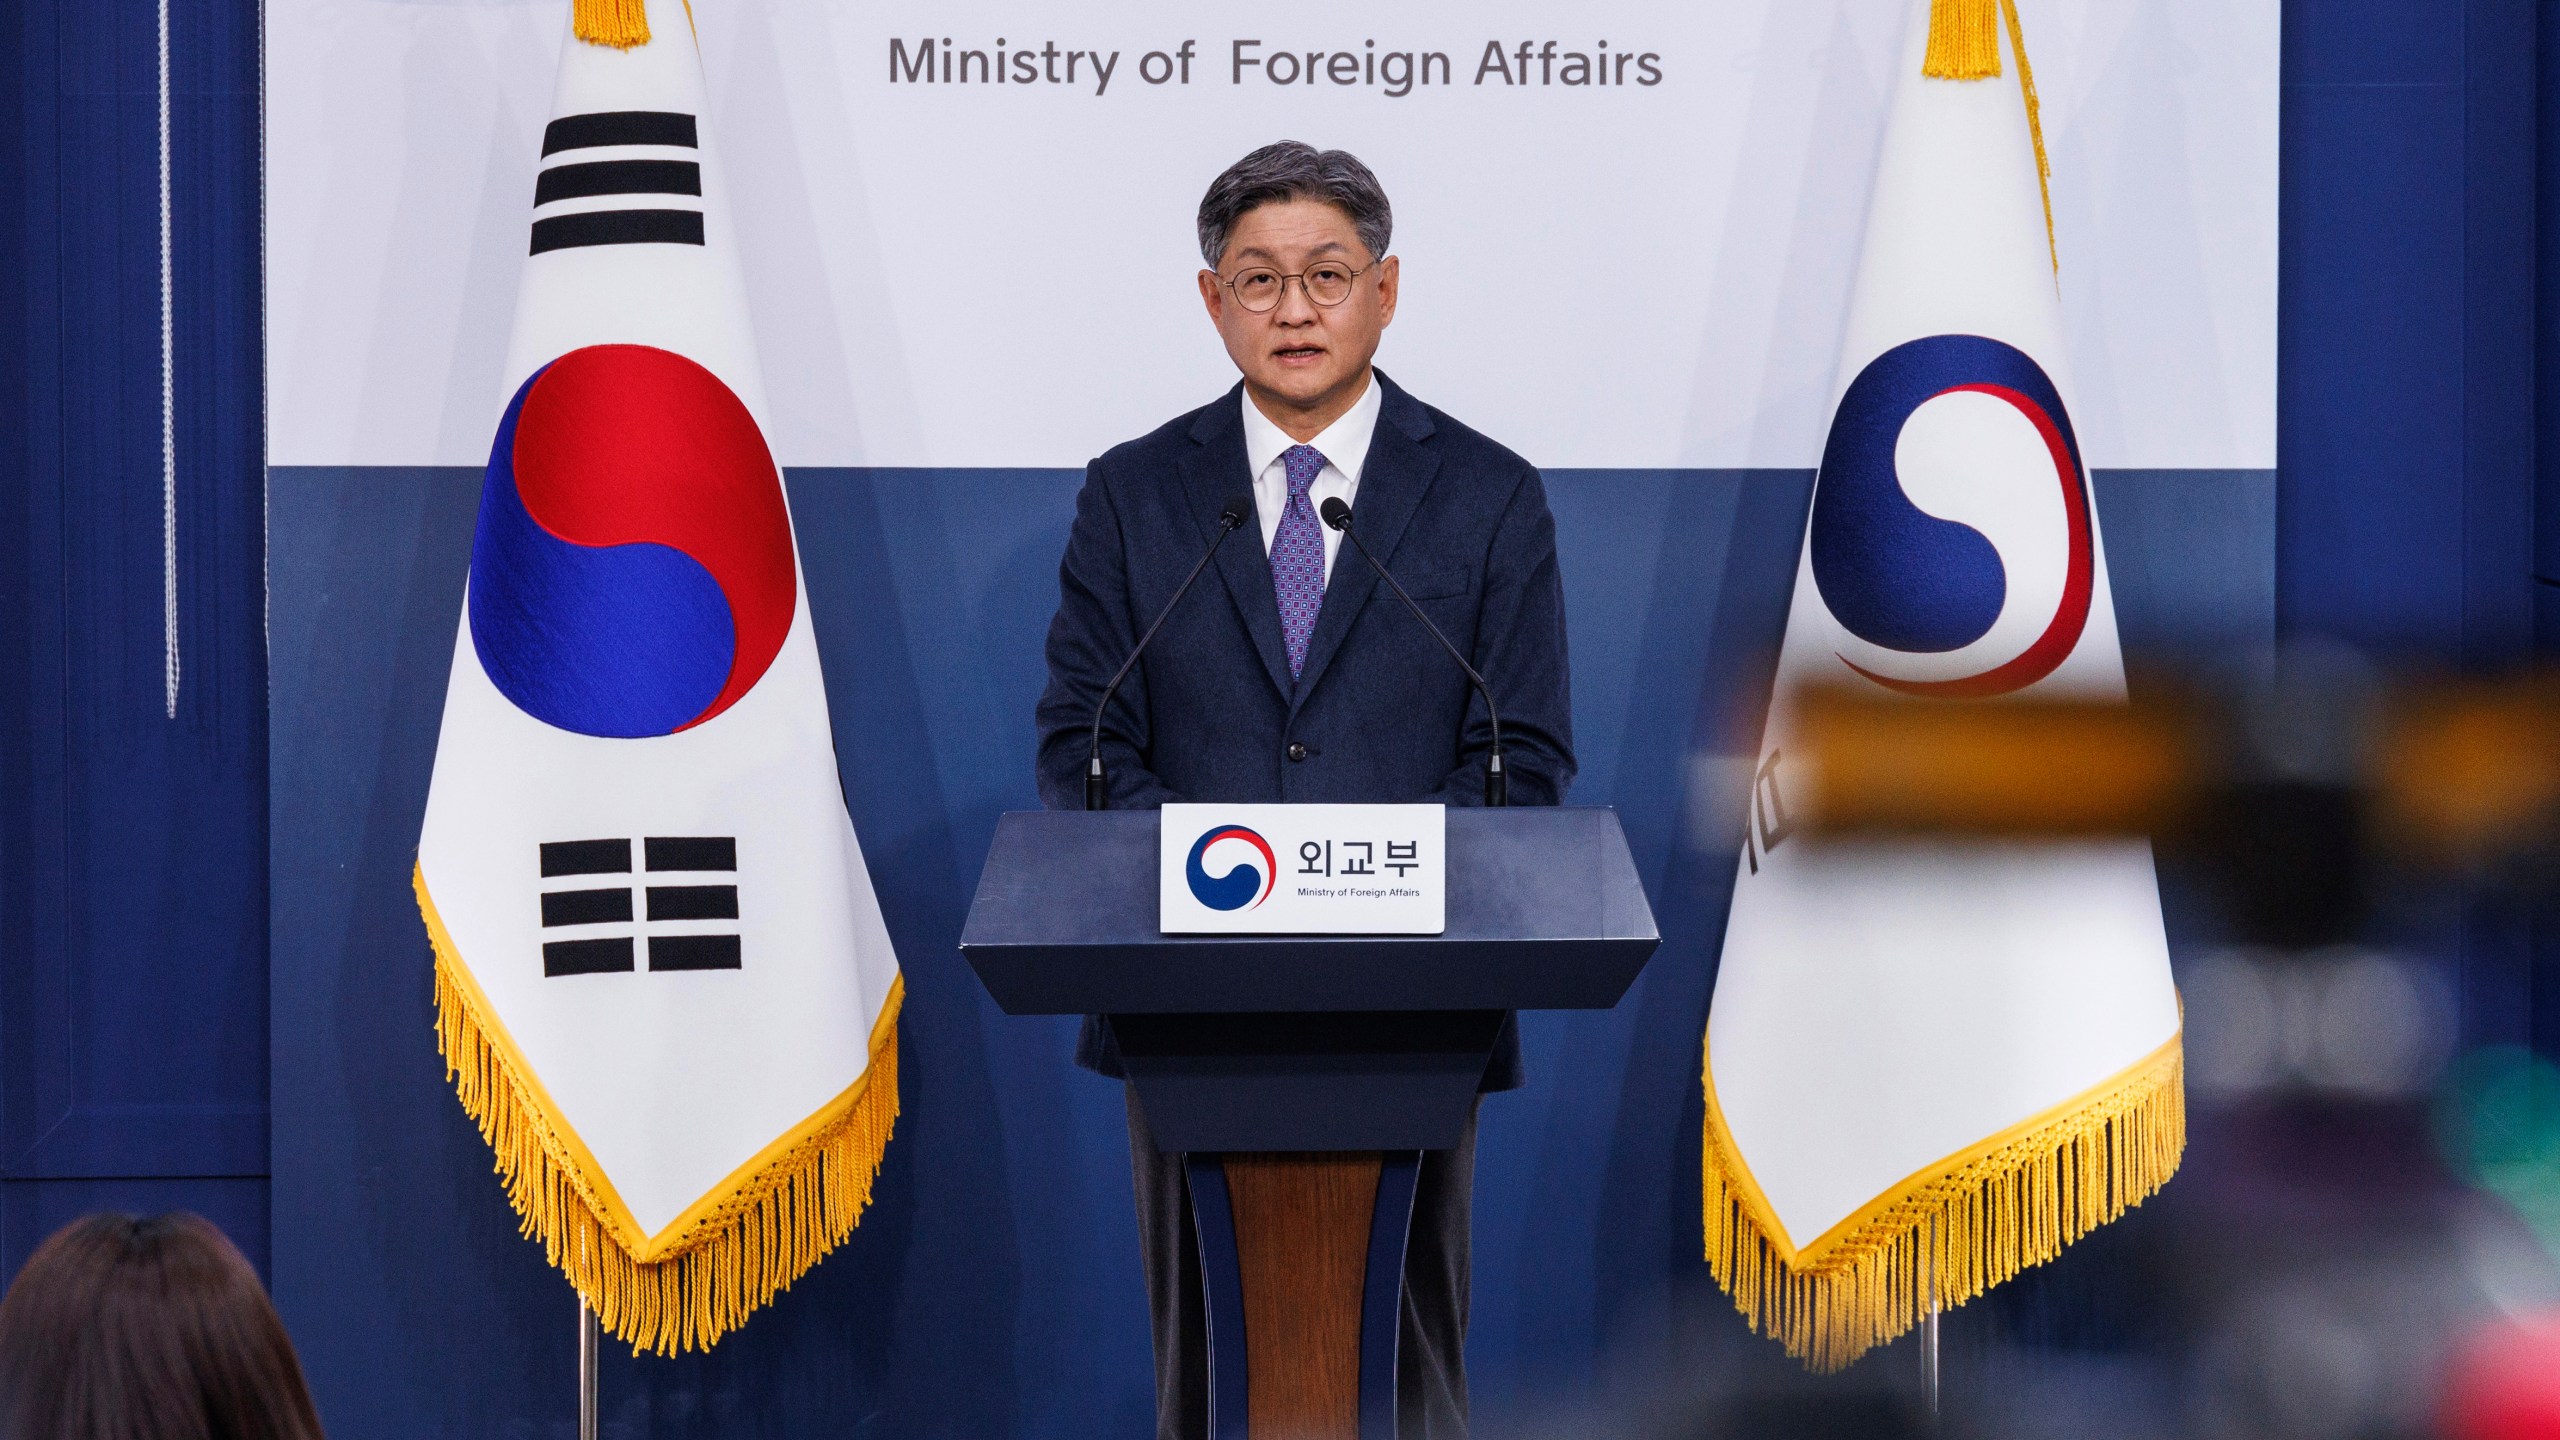 South Korean Foreign Ministry spokesperson Lim Soo-suk speaks during a briefing on a South Korean citizen arrested in Russia at the Foreign Ministry in Seoul, South Korea, Tuesday, March 12, 2024. A South Korean citizen arrested in Russia earlier this year on suspicion of spying is to remain in custody until mid-June, Russia's state news agency Tass said Monday. (Hwang Gwang-mo/Yonhap via AP)